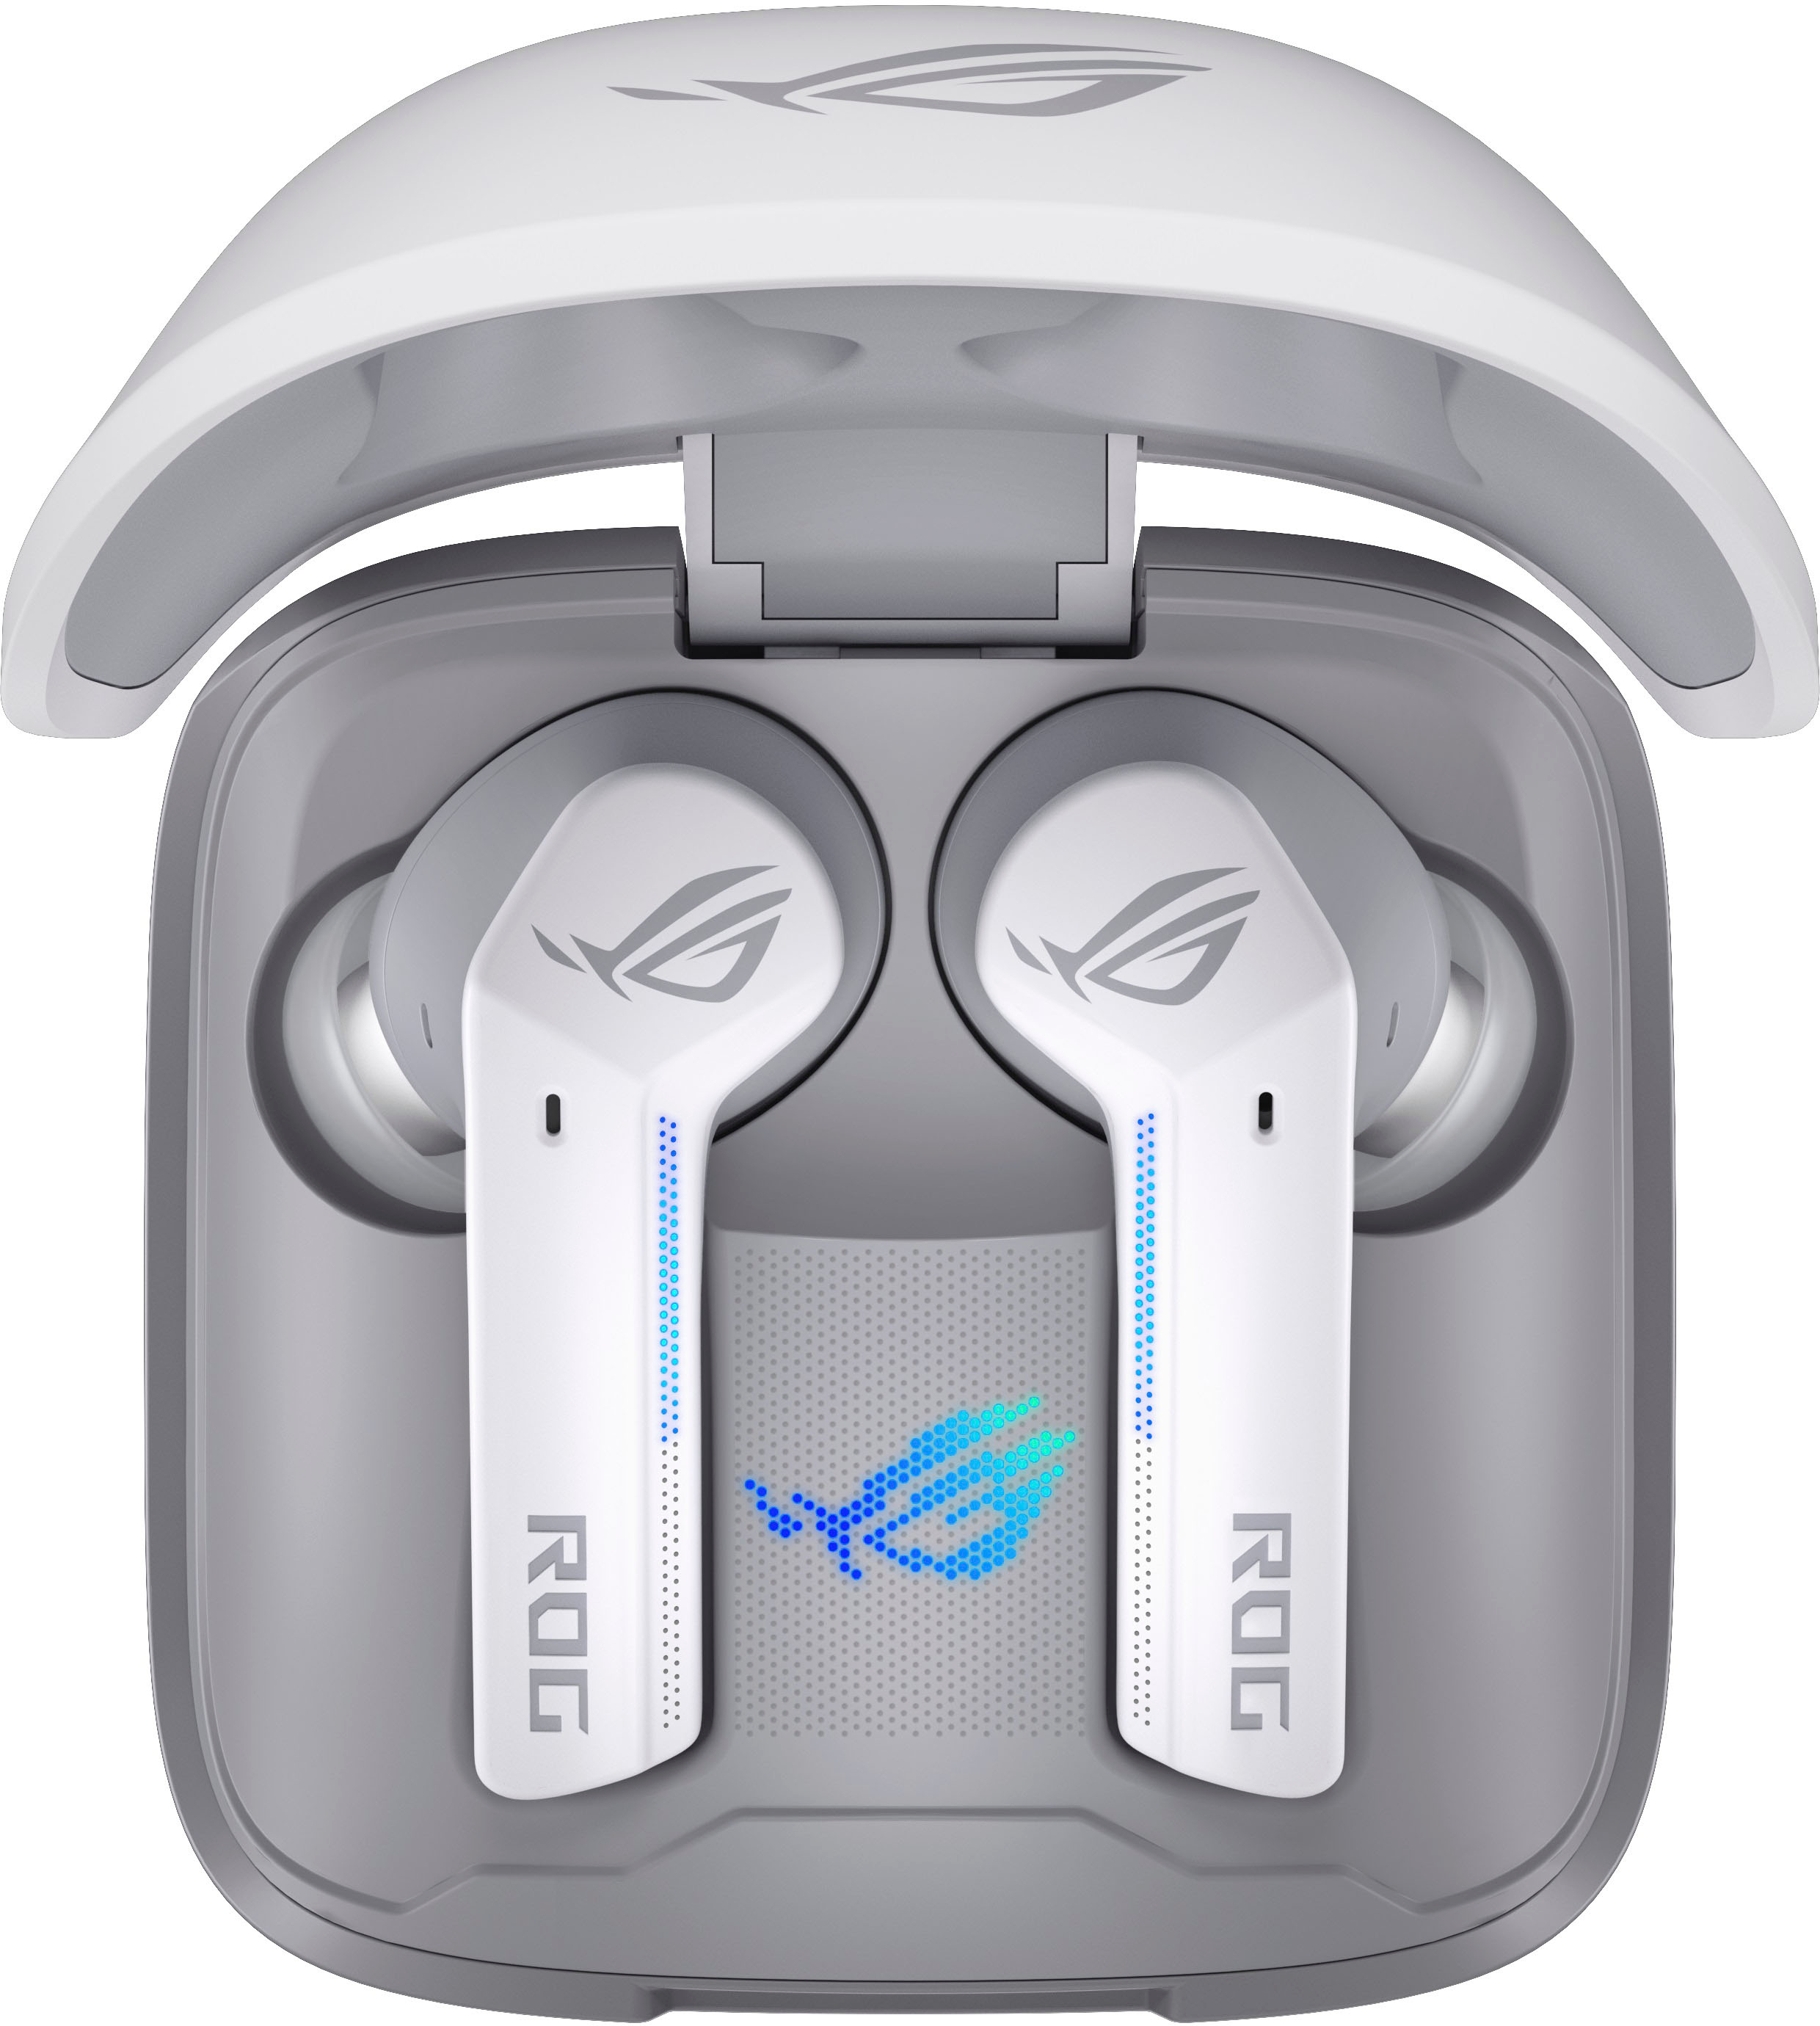 ASUS ROG CETRA True Wireless In-Ear Gaming Earbuds White ROG CETRA